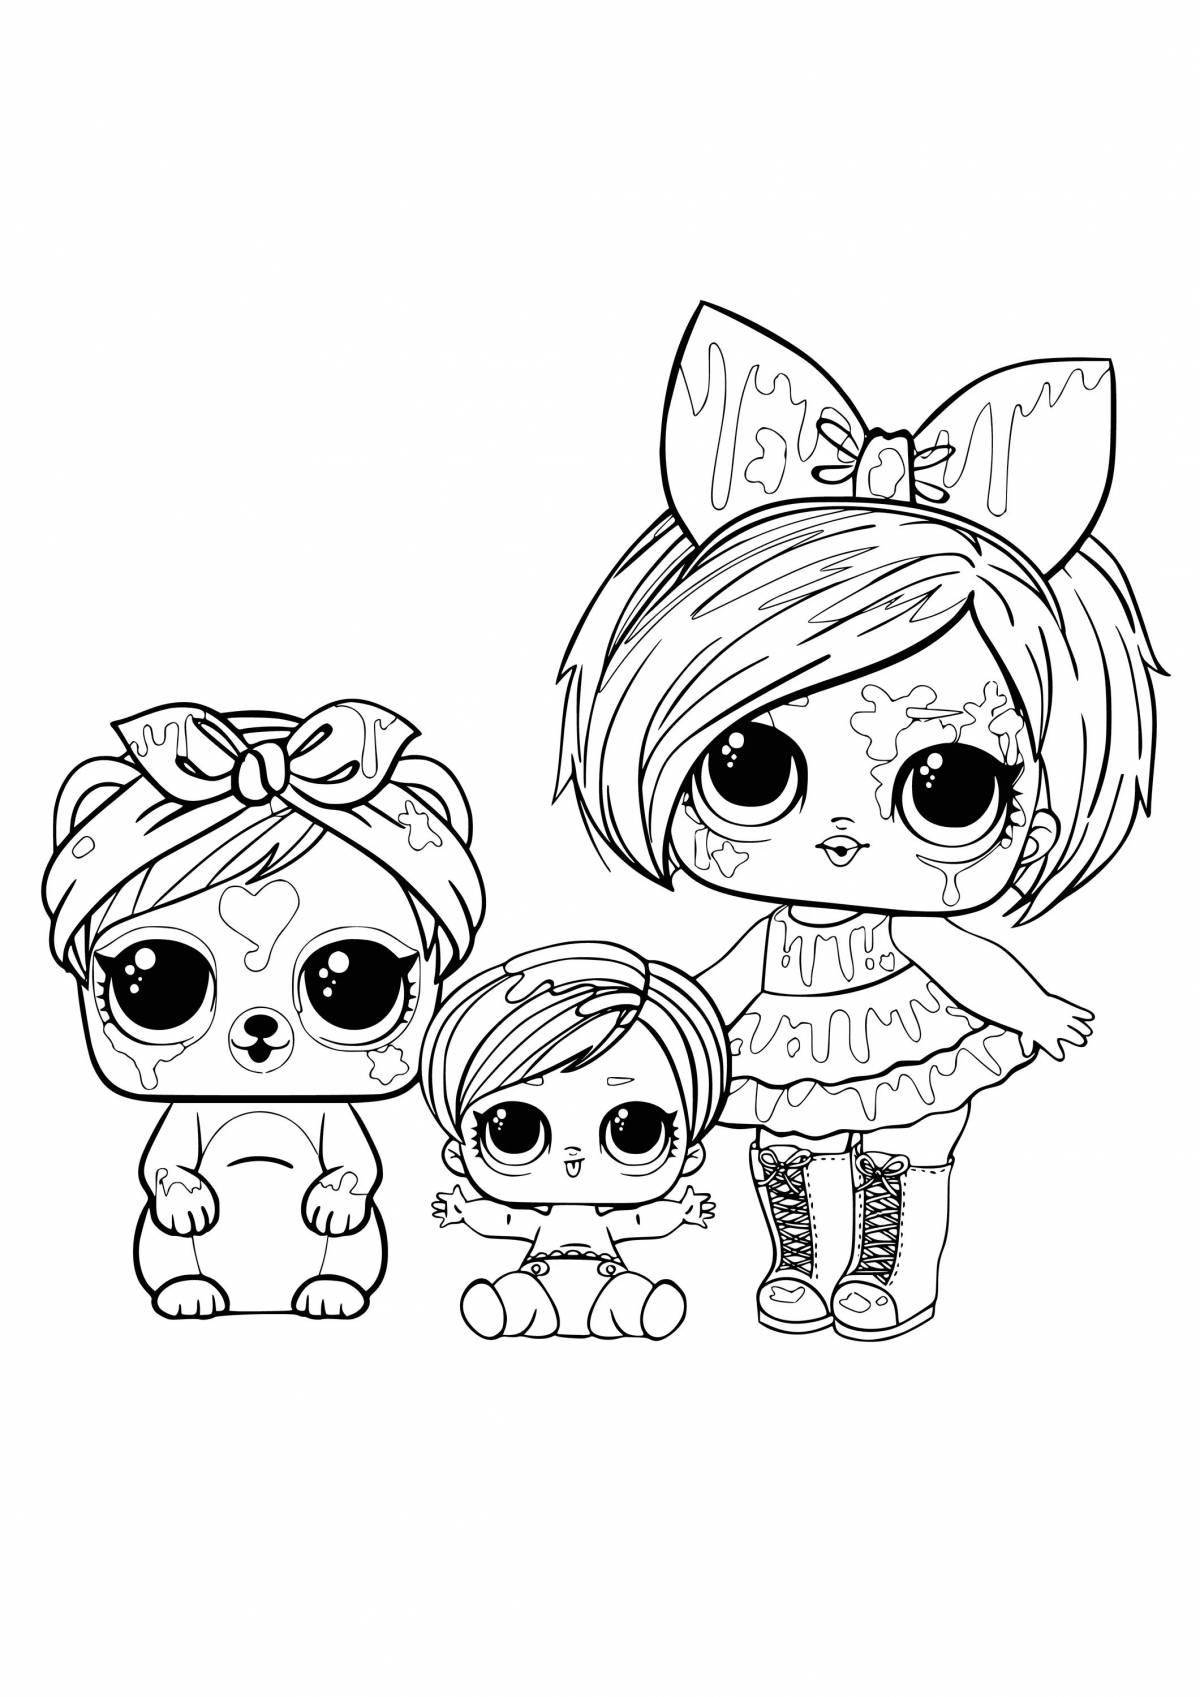 Zany coloring book with lol baby dolls and their pets